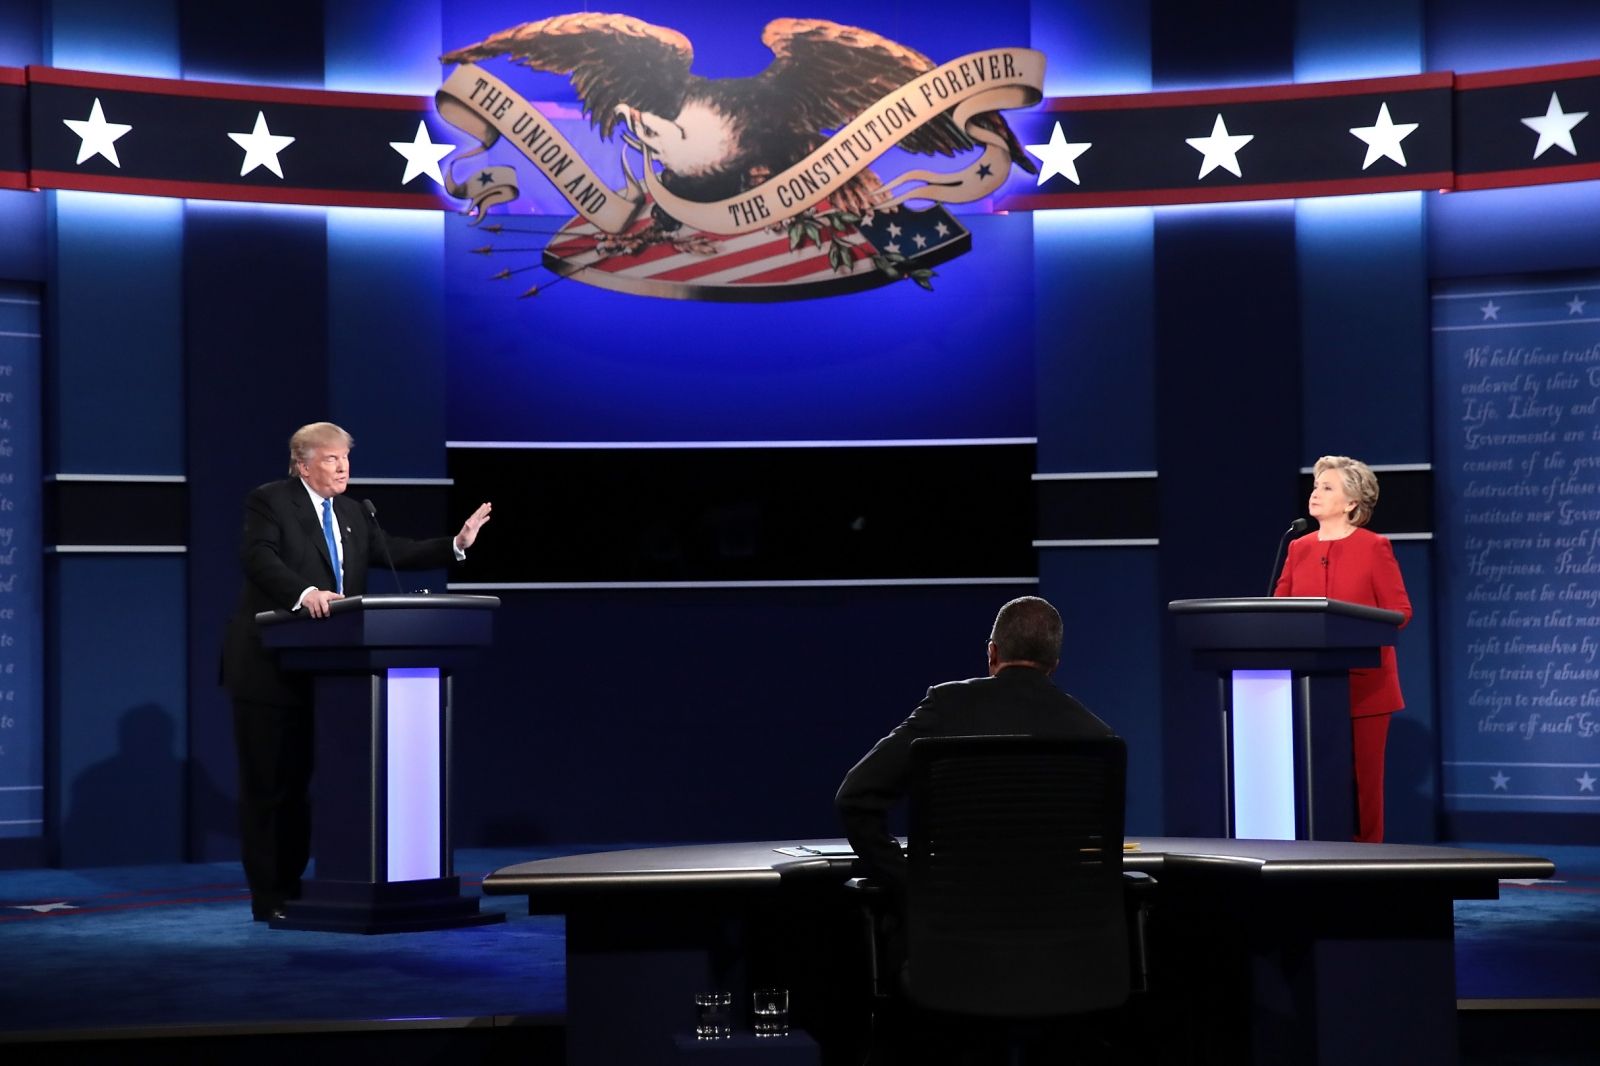 US presidential debate 2016: Journalists asked to pay $200